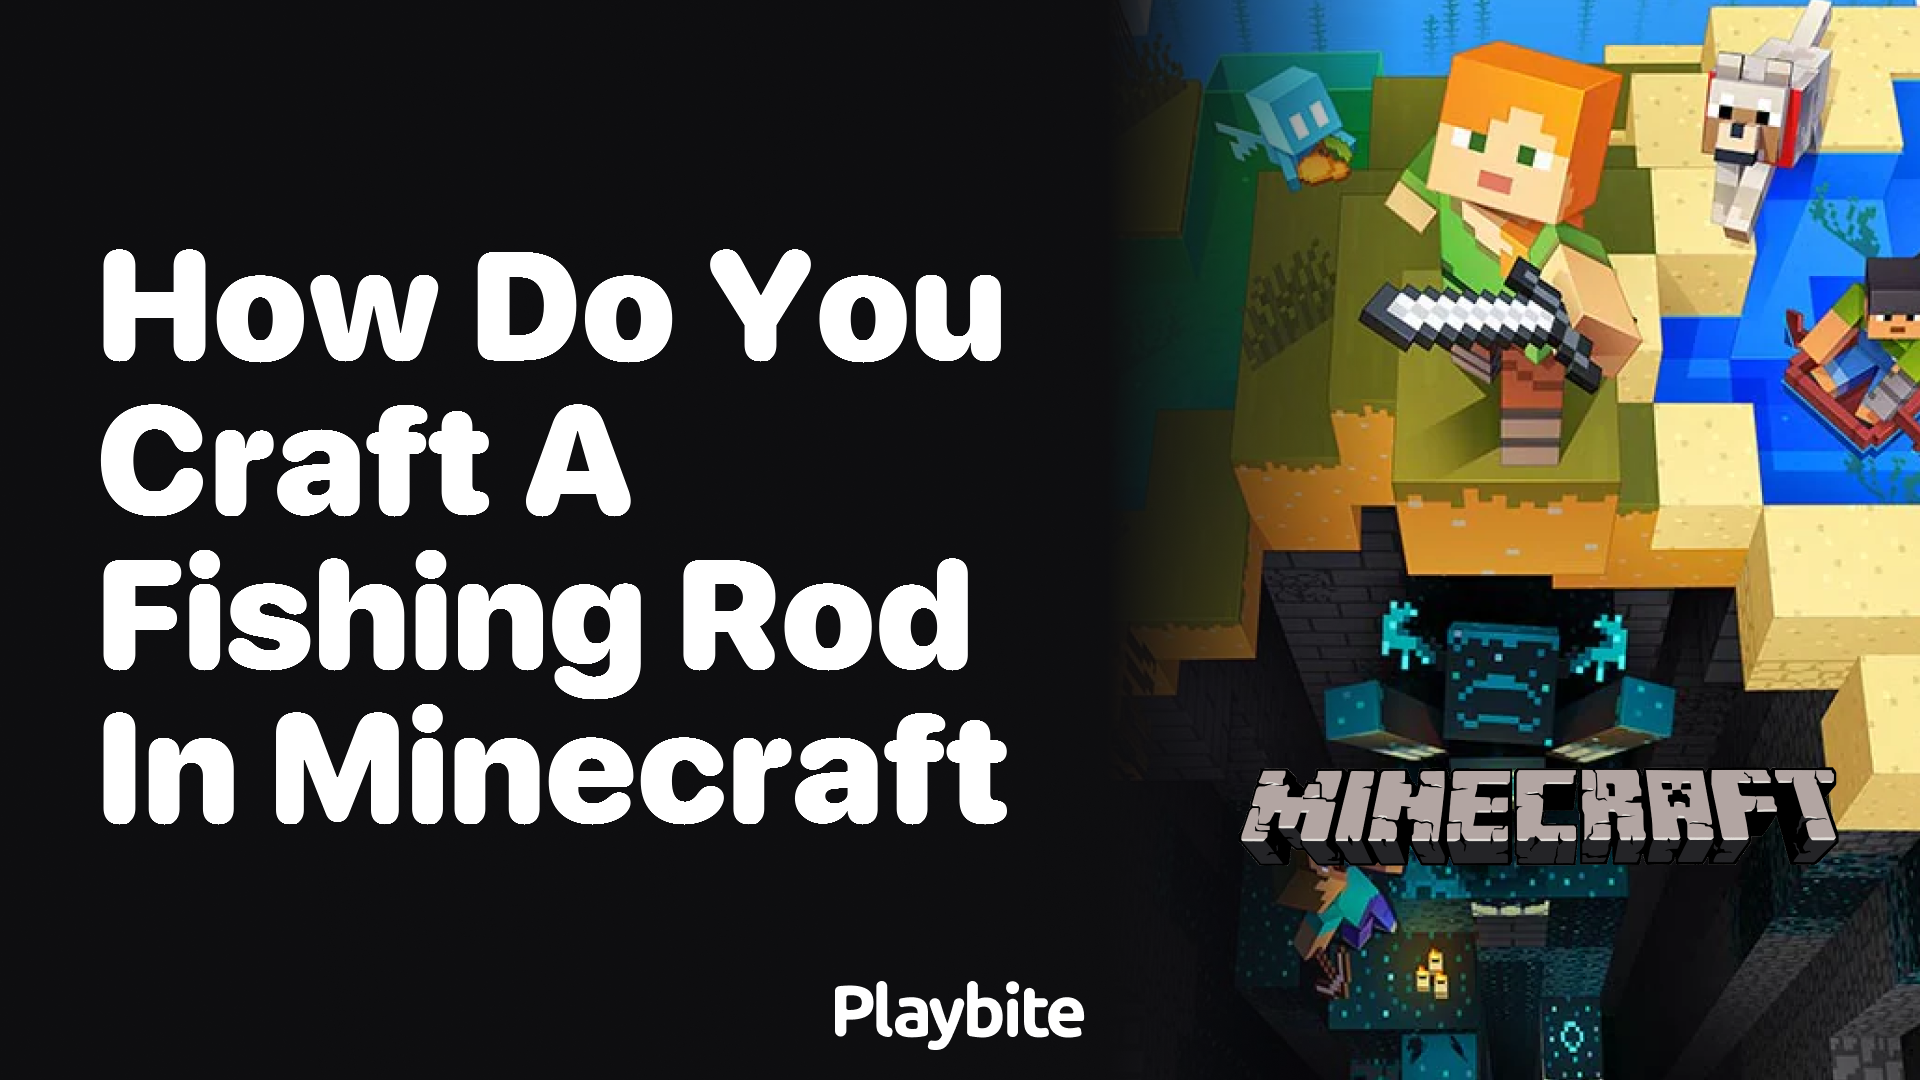 How Do You Craft a Fishing Rod in Minecraft? - Playbite